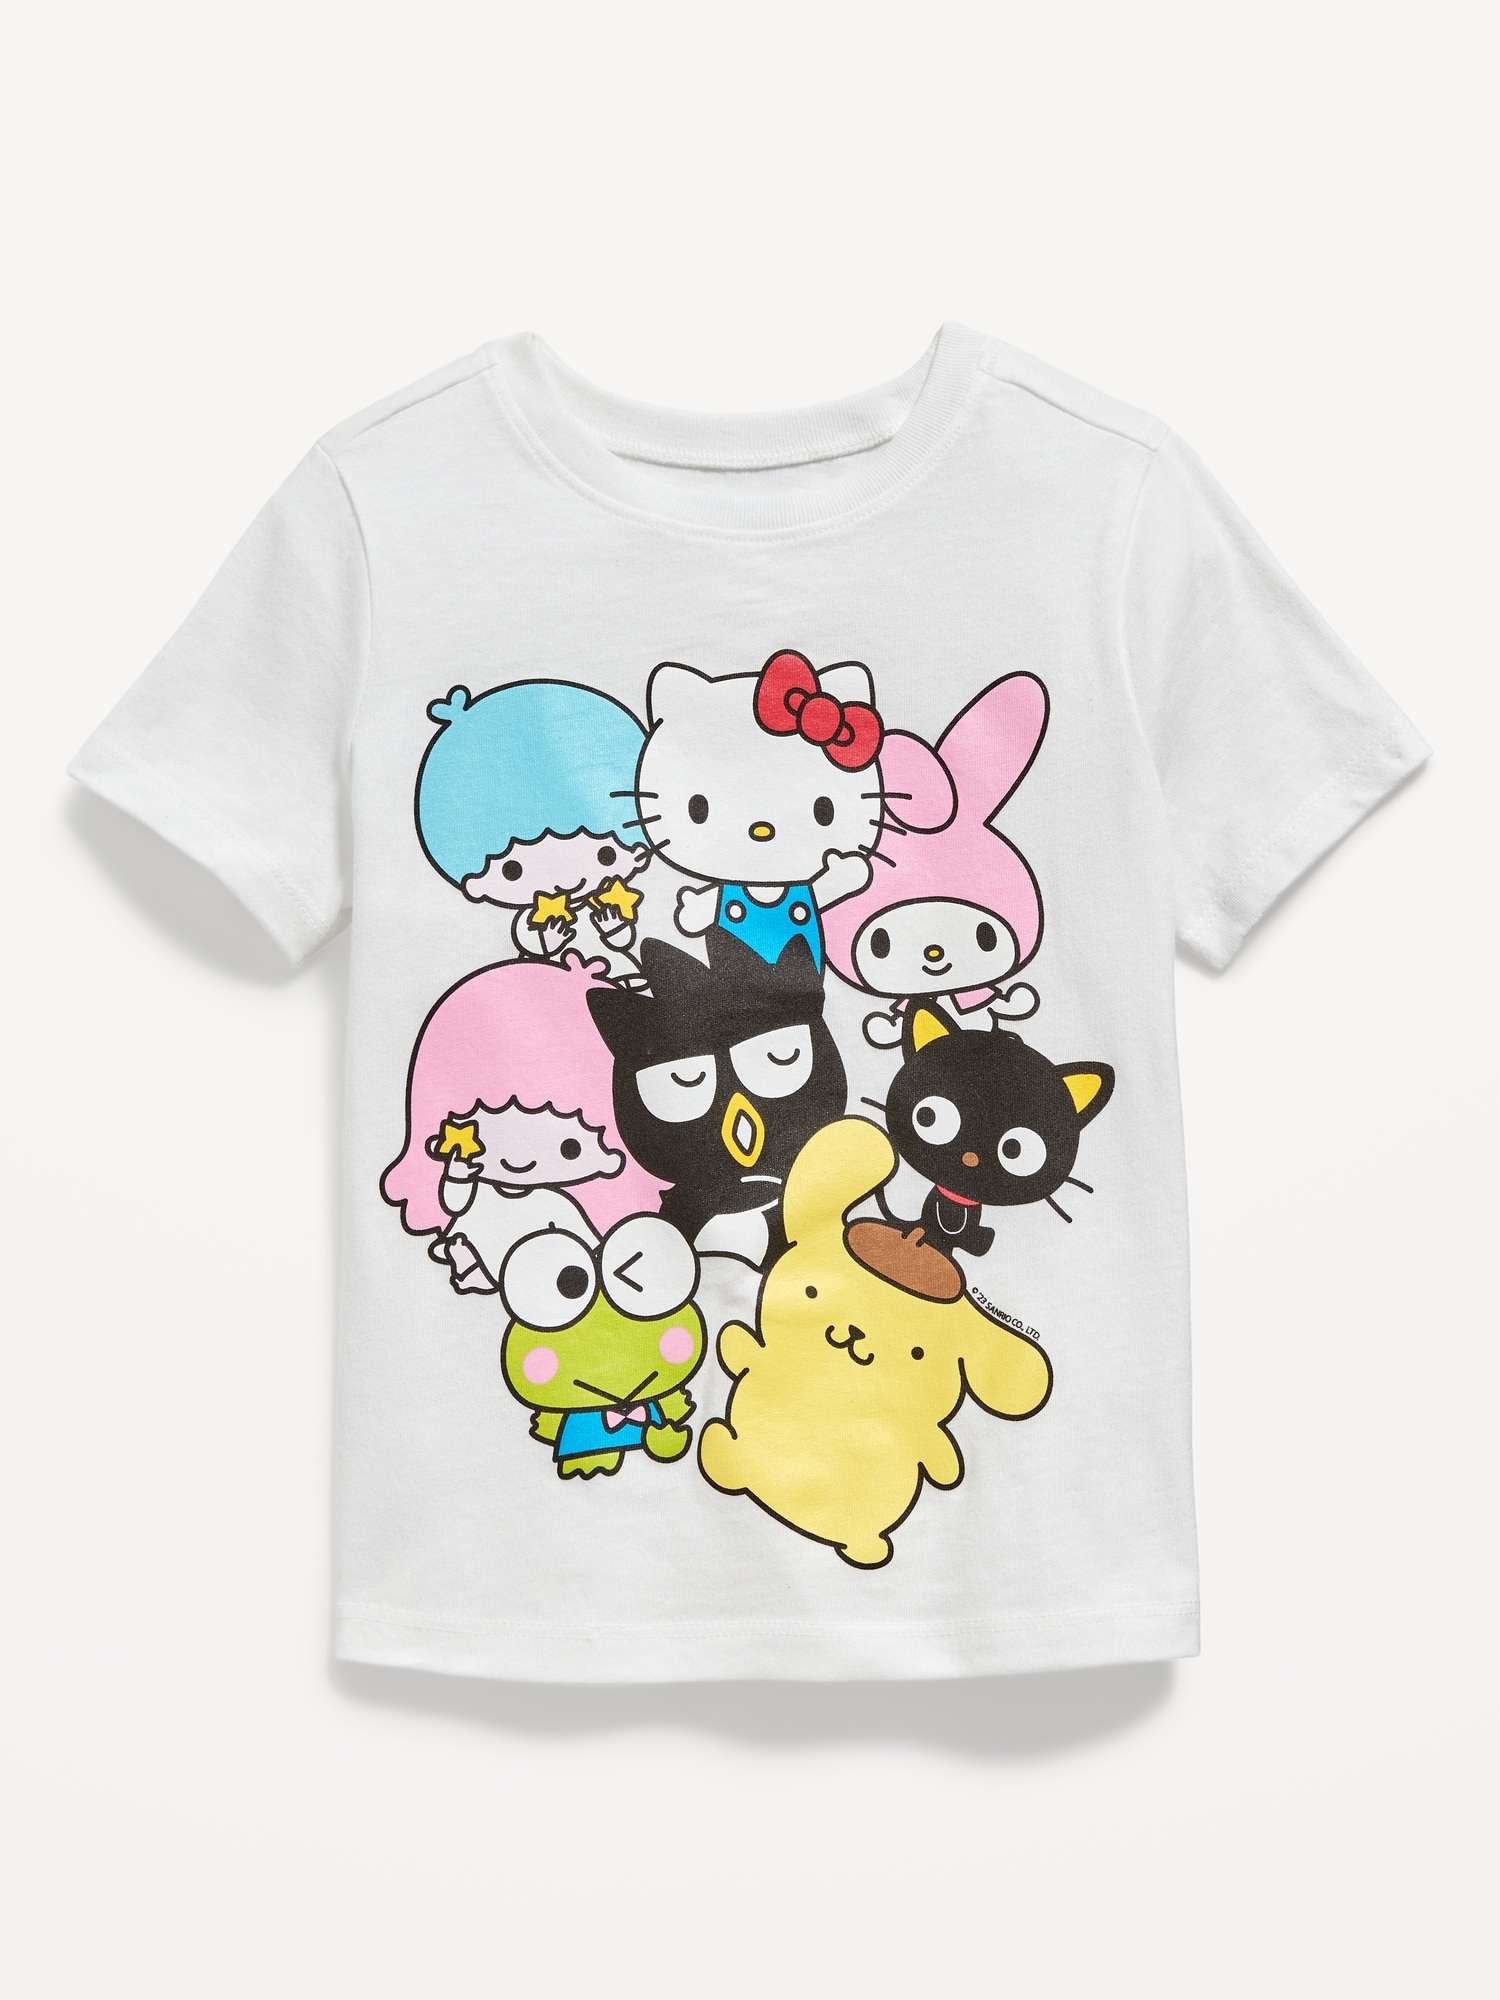 Matching Hello Kitty Unisex Graphic T-Shirt for Toddler